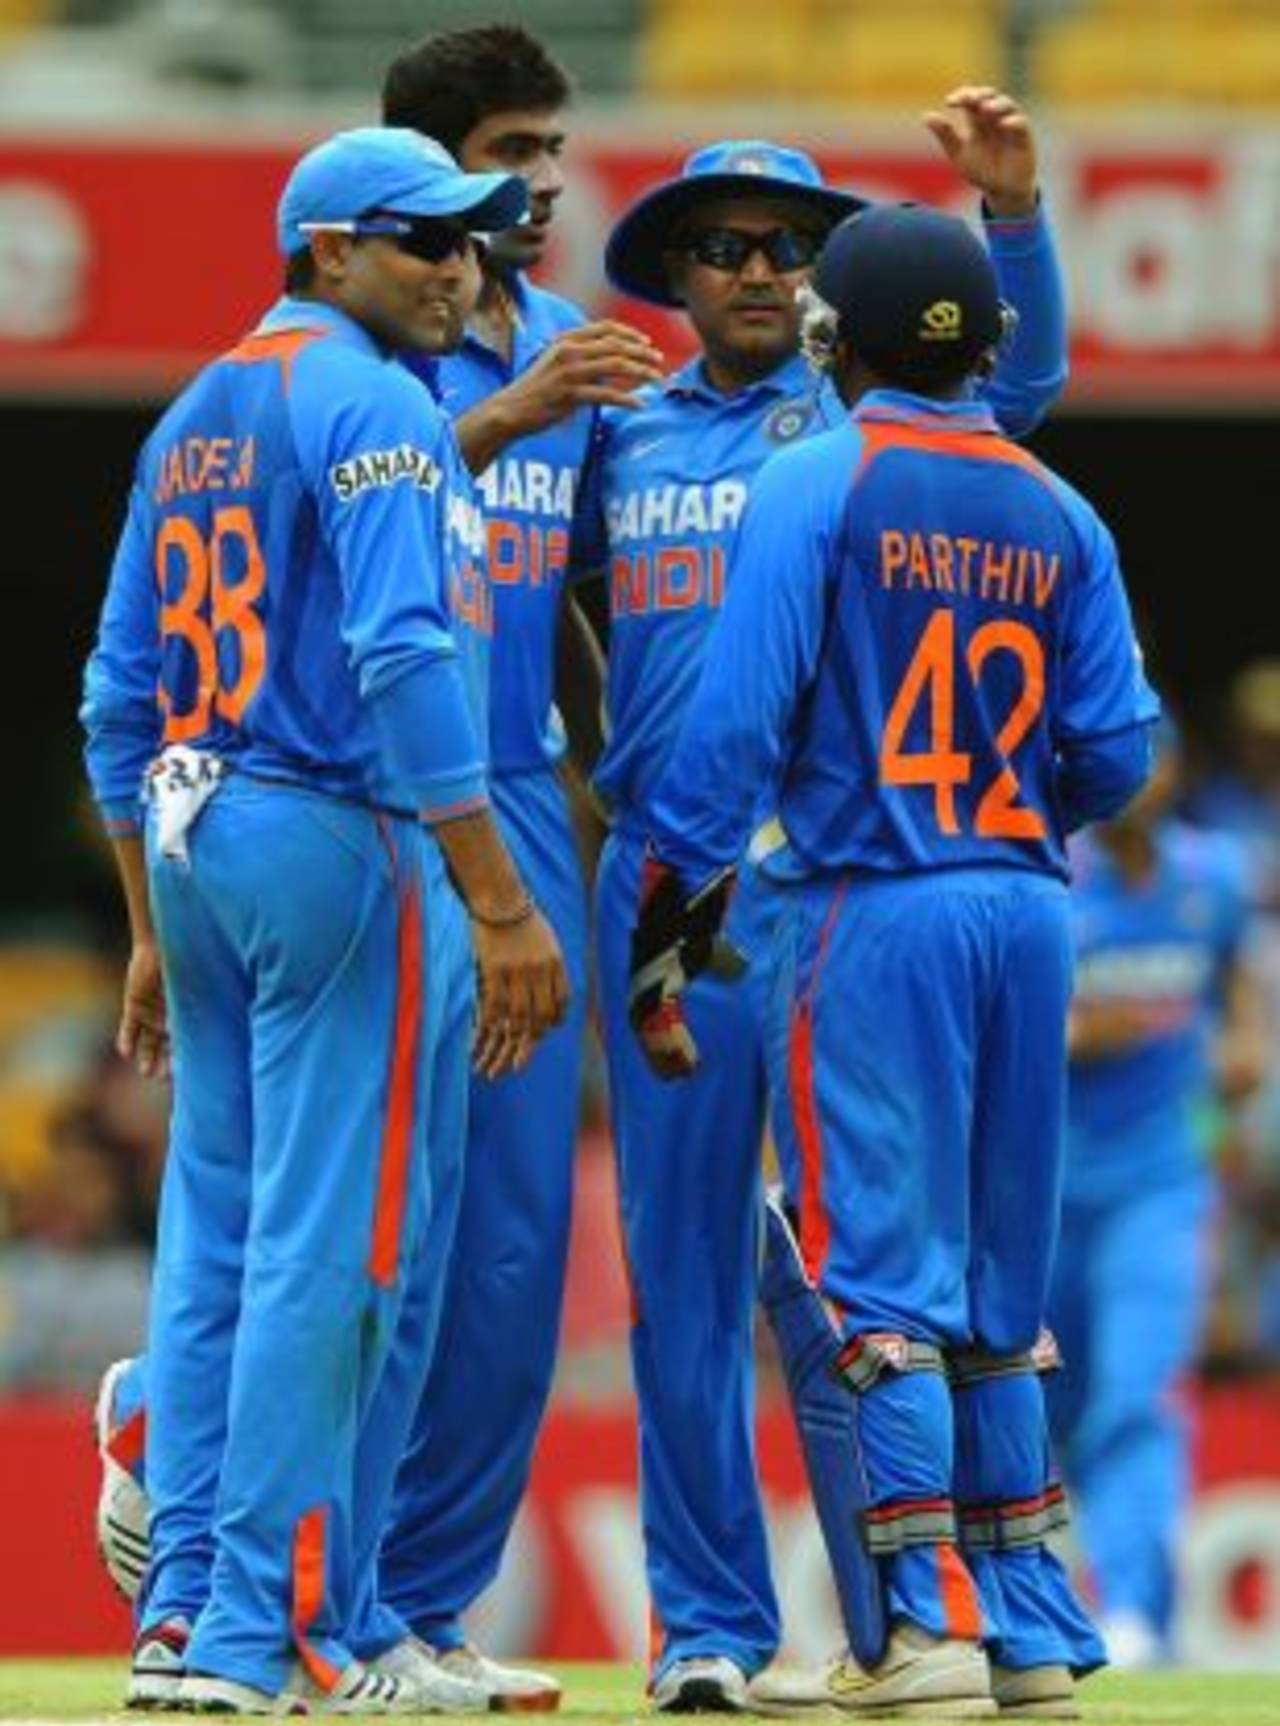 GS Walia, the India media manager, said that the team was concerned about what the media was writing&nbsp;&nbsp;&bull;&nbsp;&nbsp;Getty Images